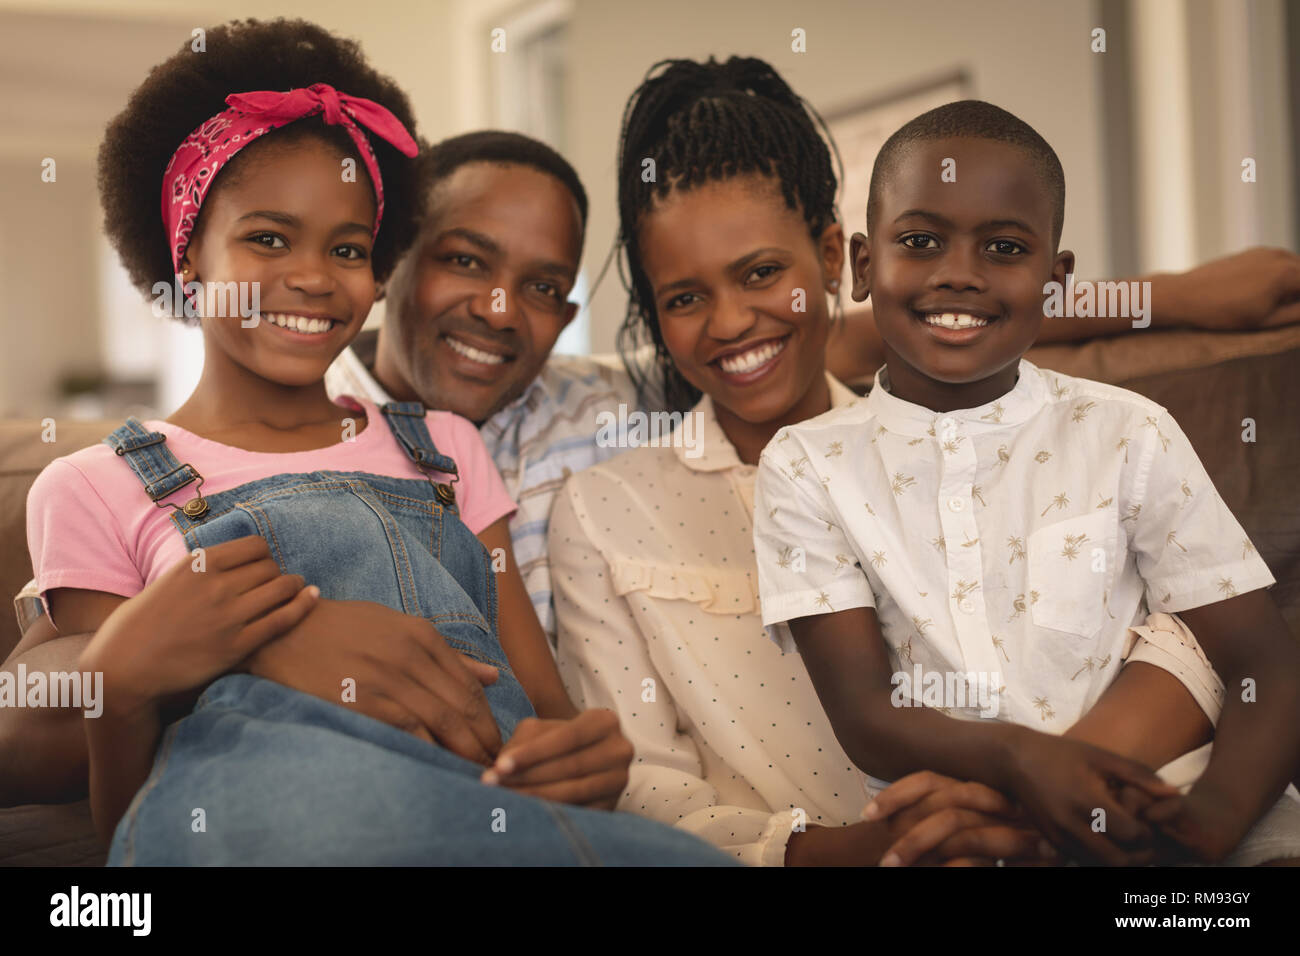 Happy African American family assis sur le canapé et looking at camera Banque D'Images